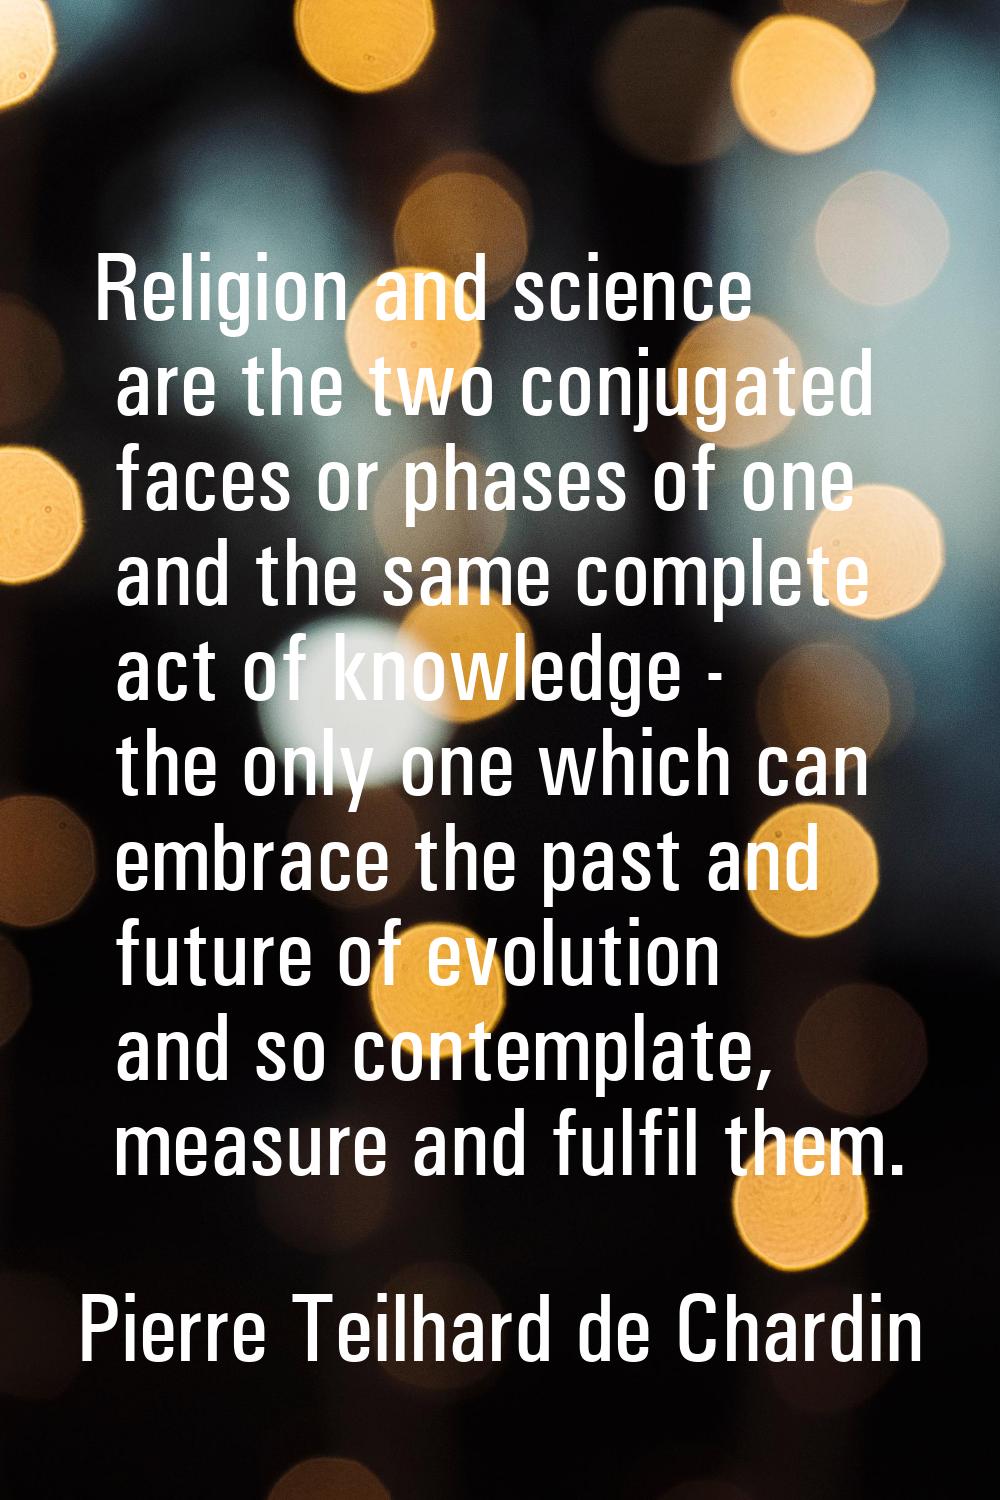 Religion and science are the two conjugated faces or phases of one and the same complete act of kno